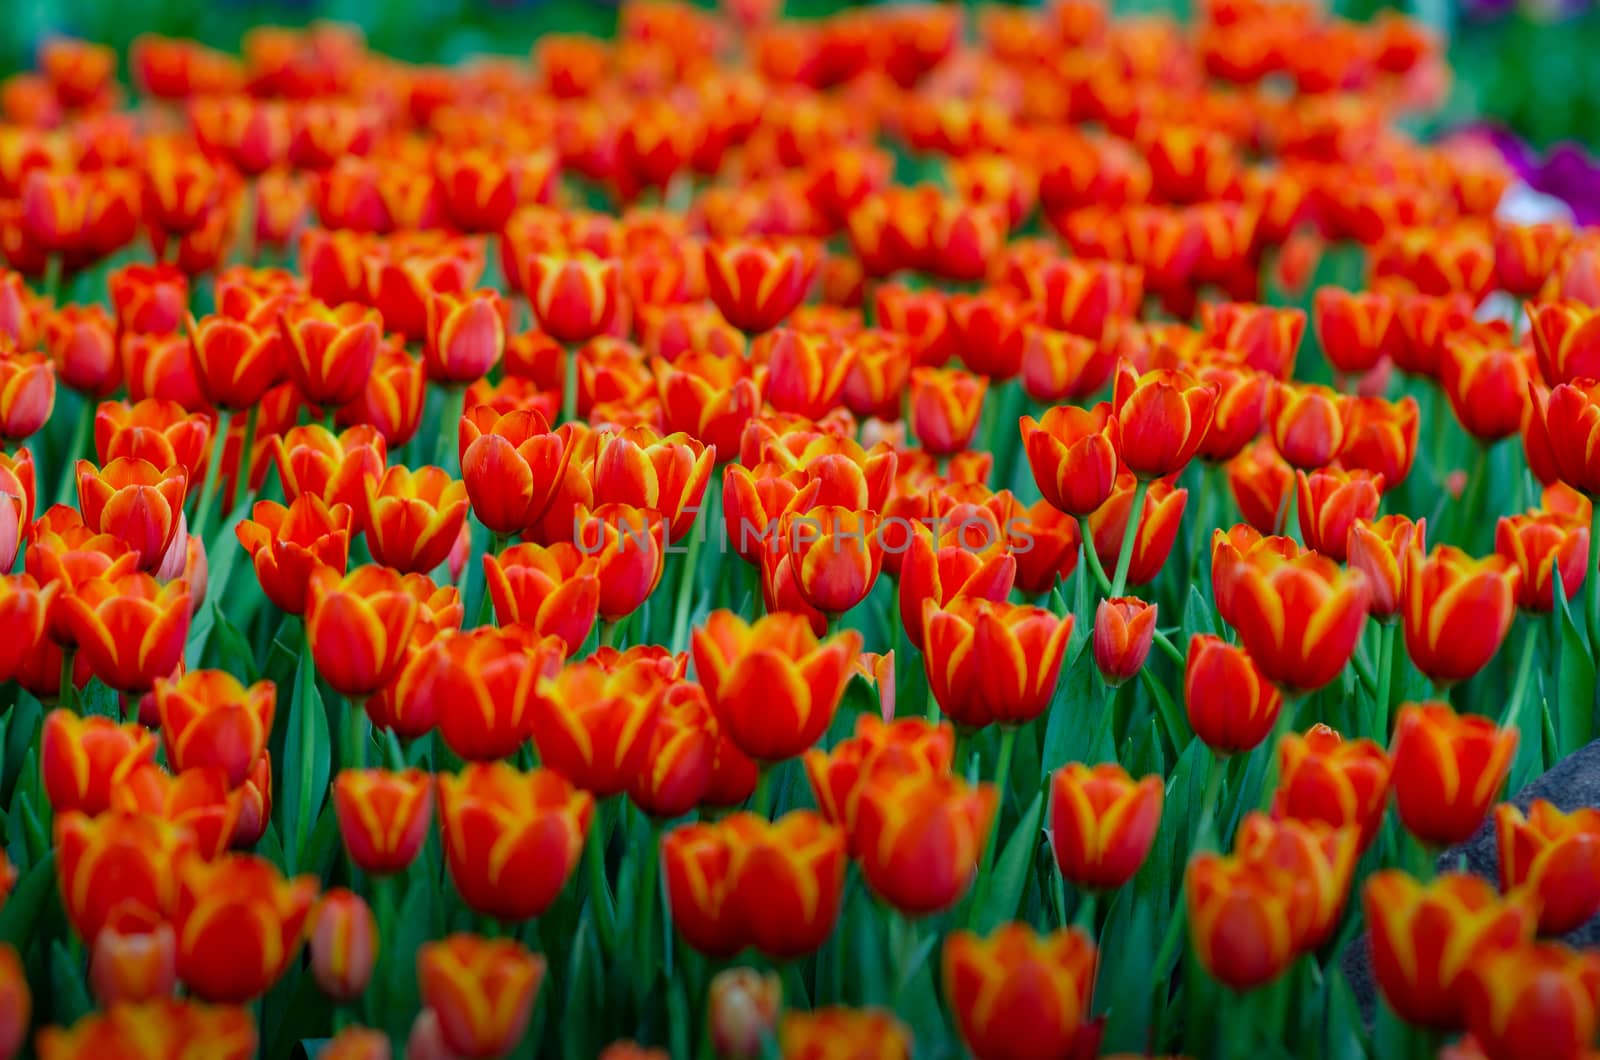 The red yellow tulip fields are densely blooming